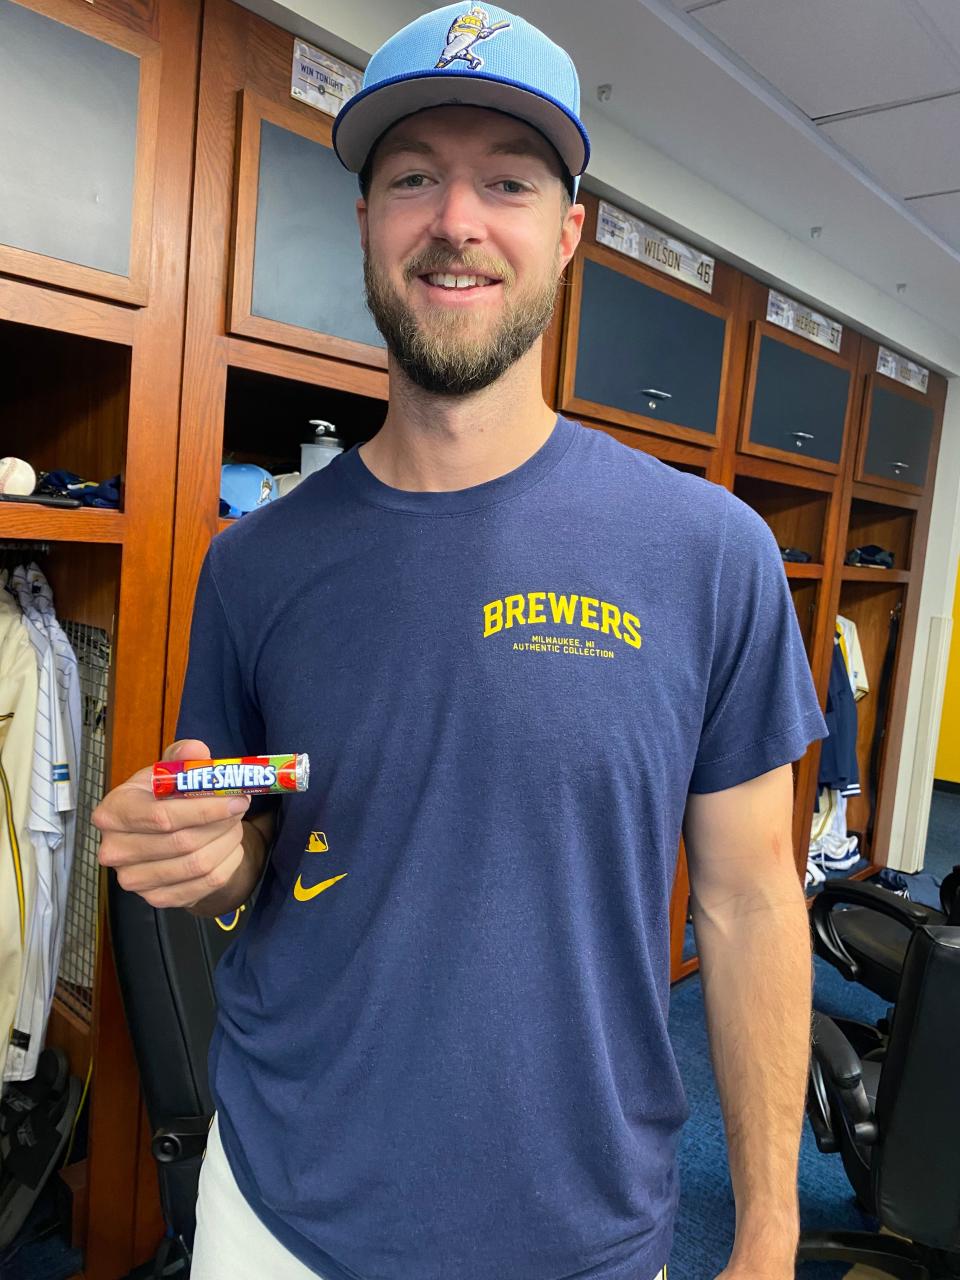 Brewers pitcher Colin Rea says he probably hasn't had Life Savers since he was in third grade, but they're easy to find in the Brewers clubhouse.